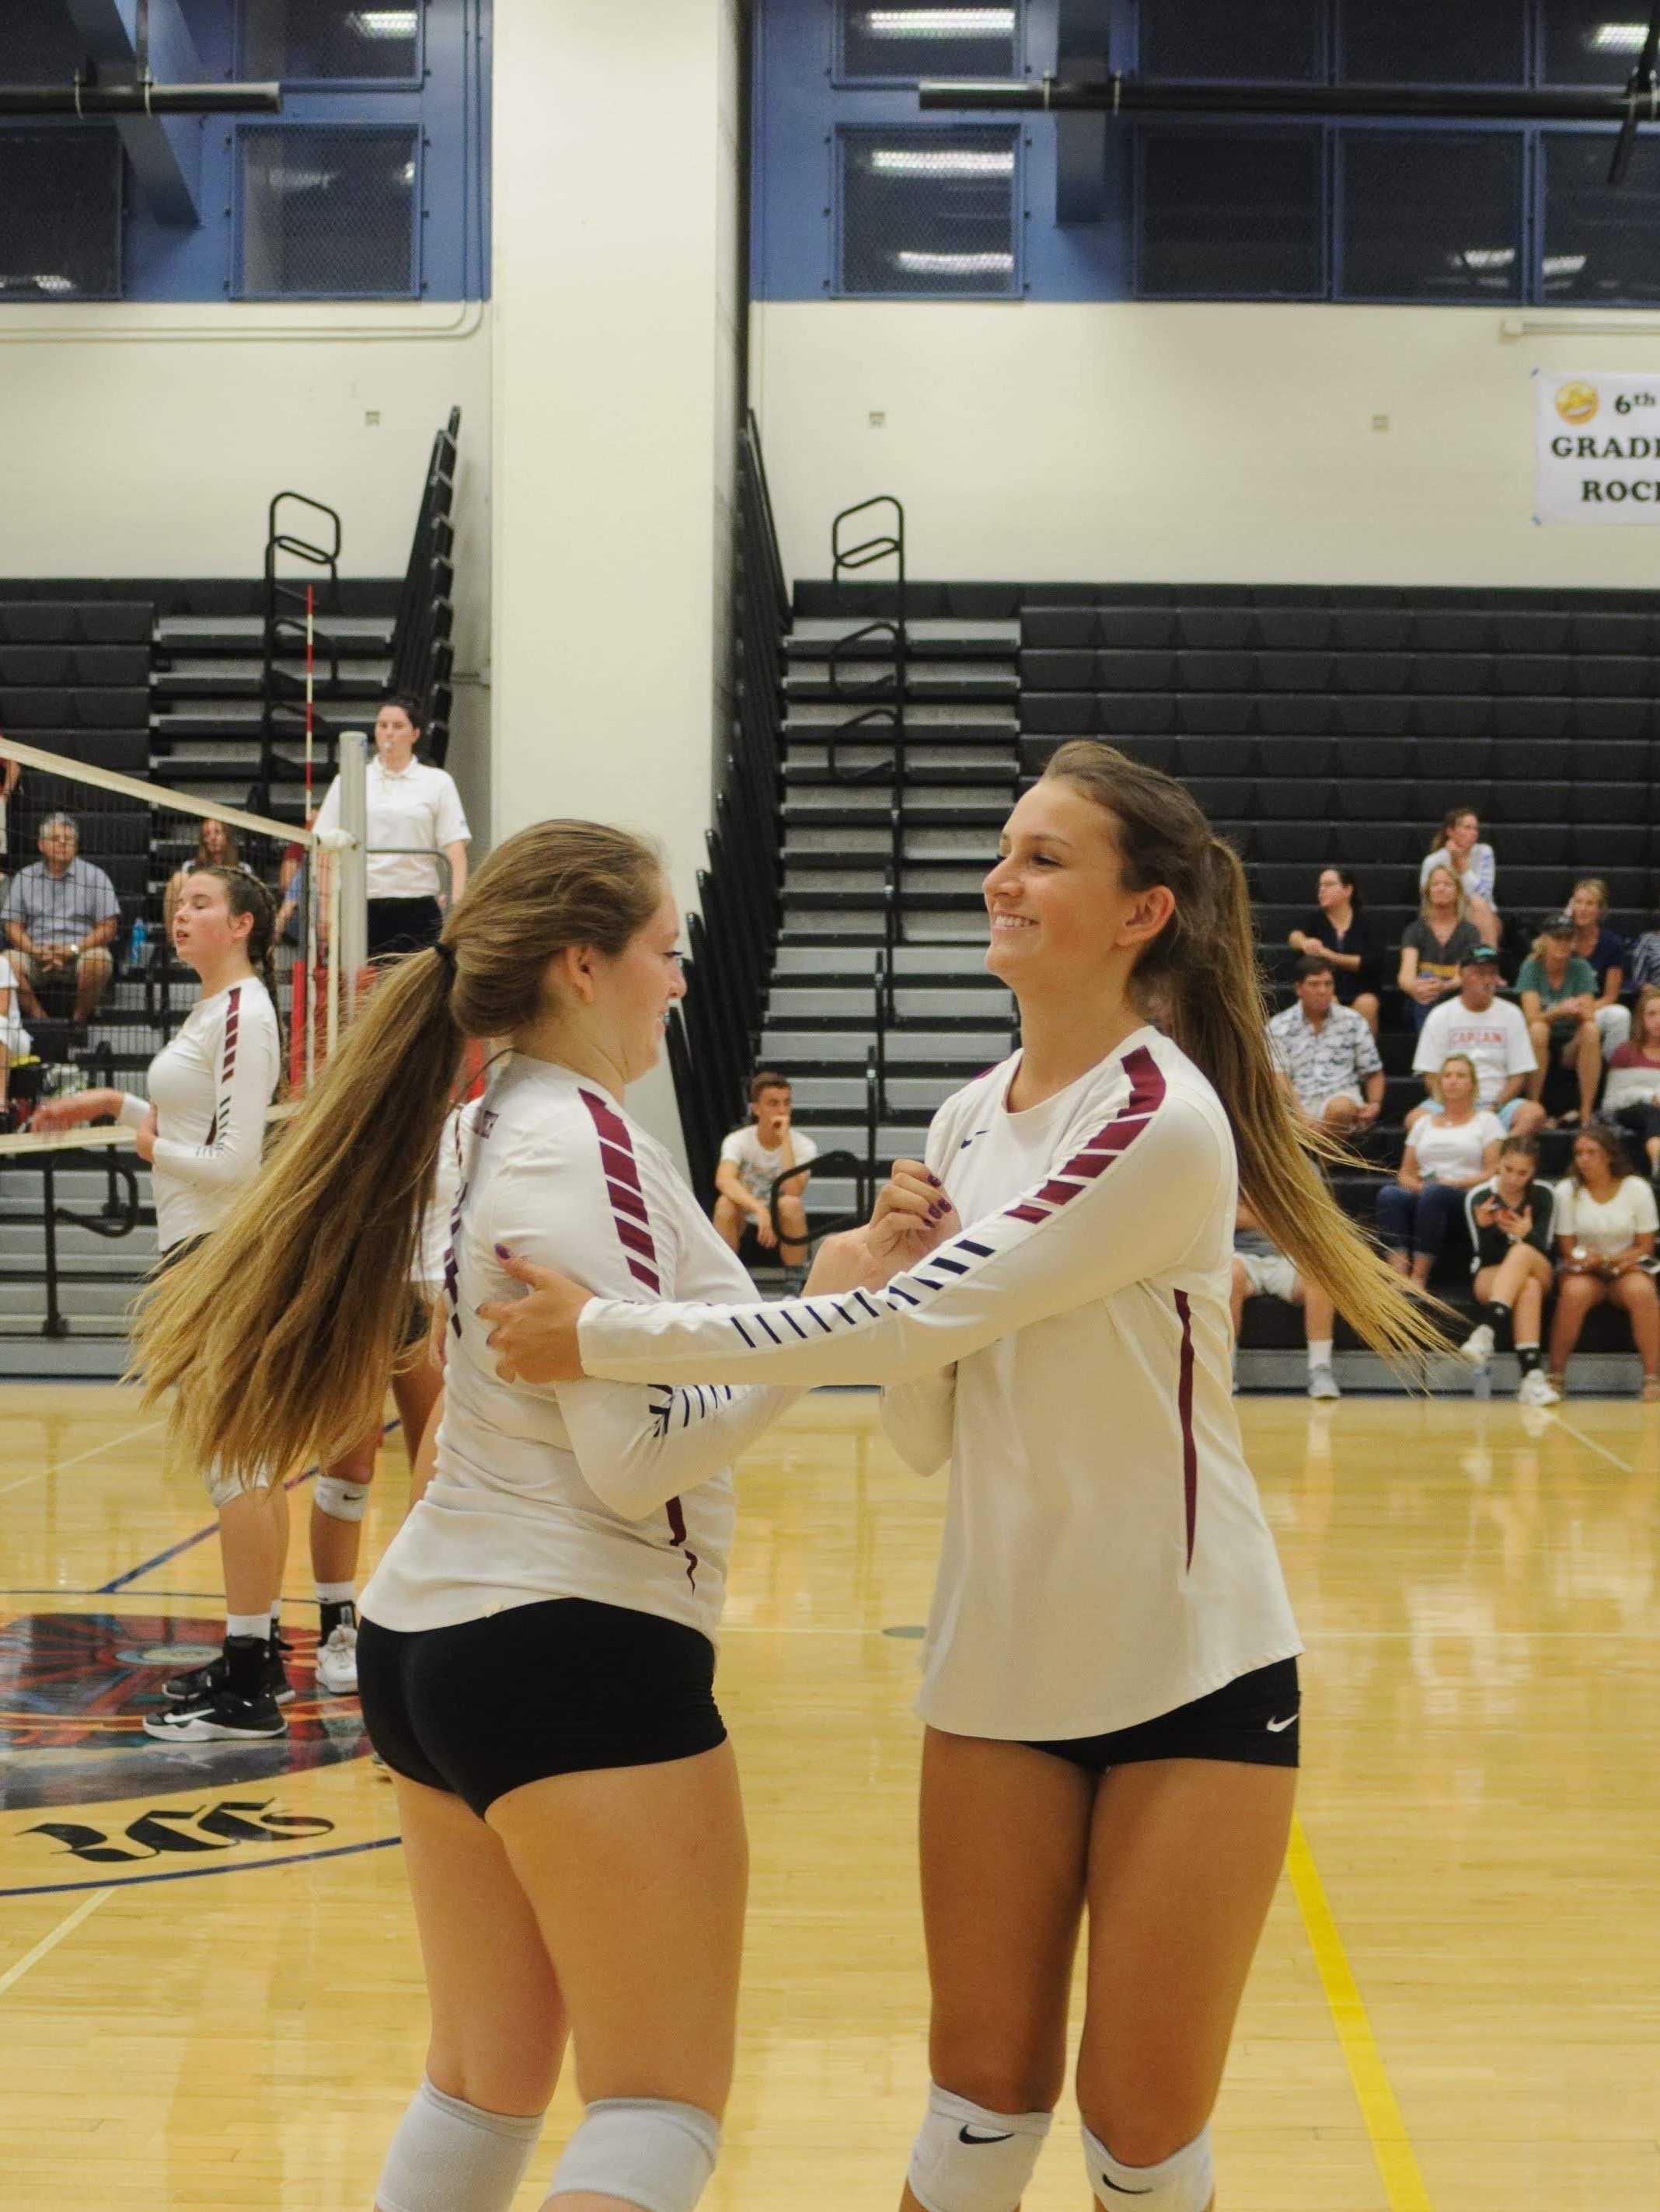 Pearl Esparza ‘19 congratulating sister Angel Esparza ‘20 as she subs in. Credit: Muriel Rowley / The Foothill Dragon Press